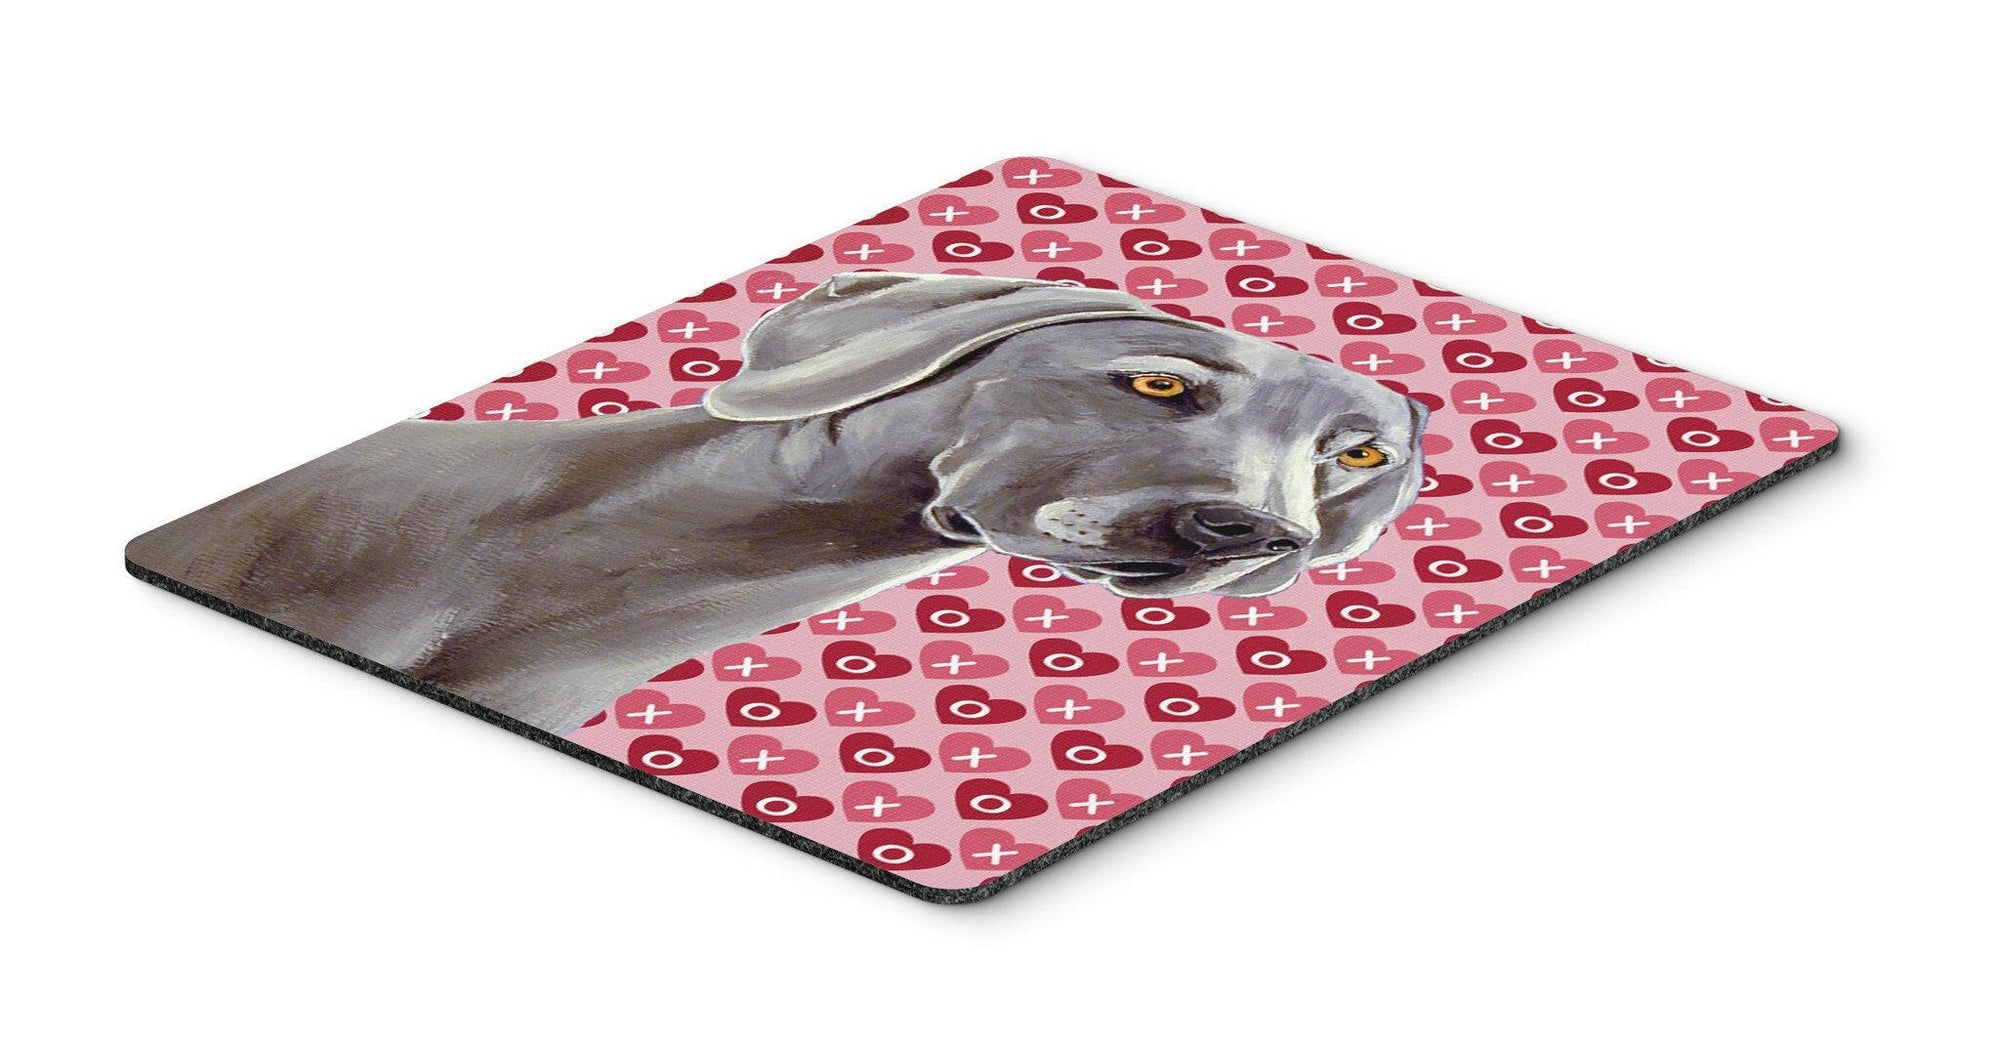 Weimaraner Hearts Love and Valentine's Day Mouse Pad, Hot Pad or Trivet by Caroline's Treasures